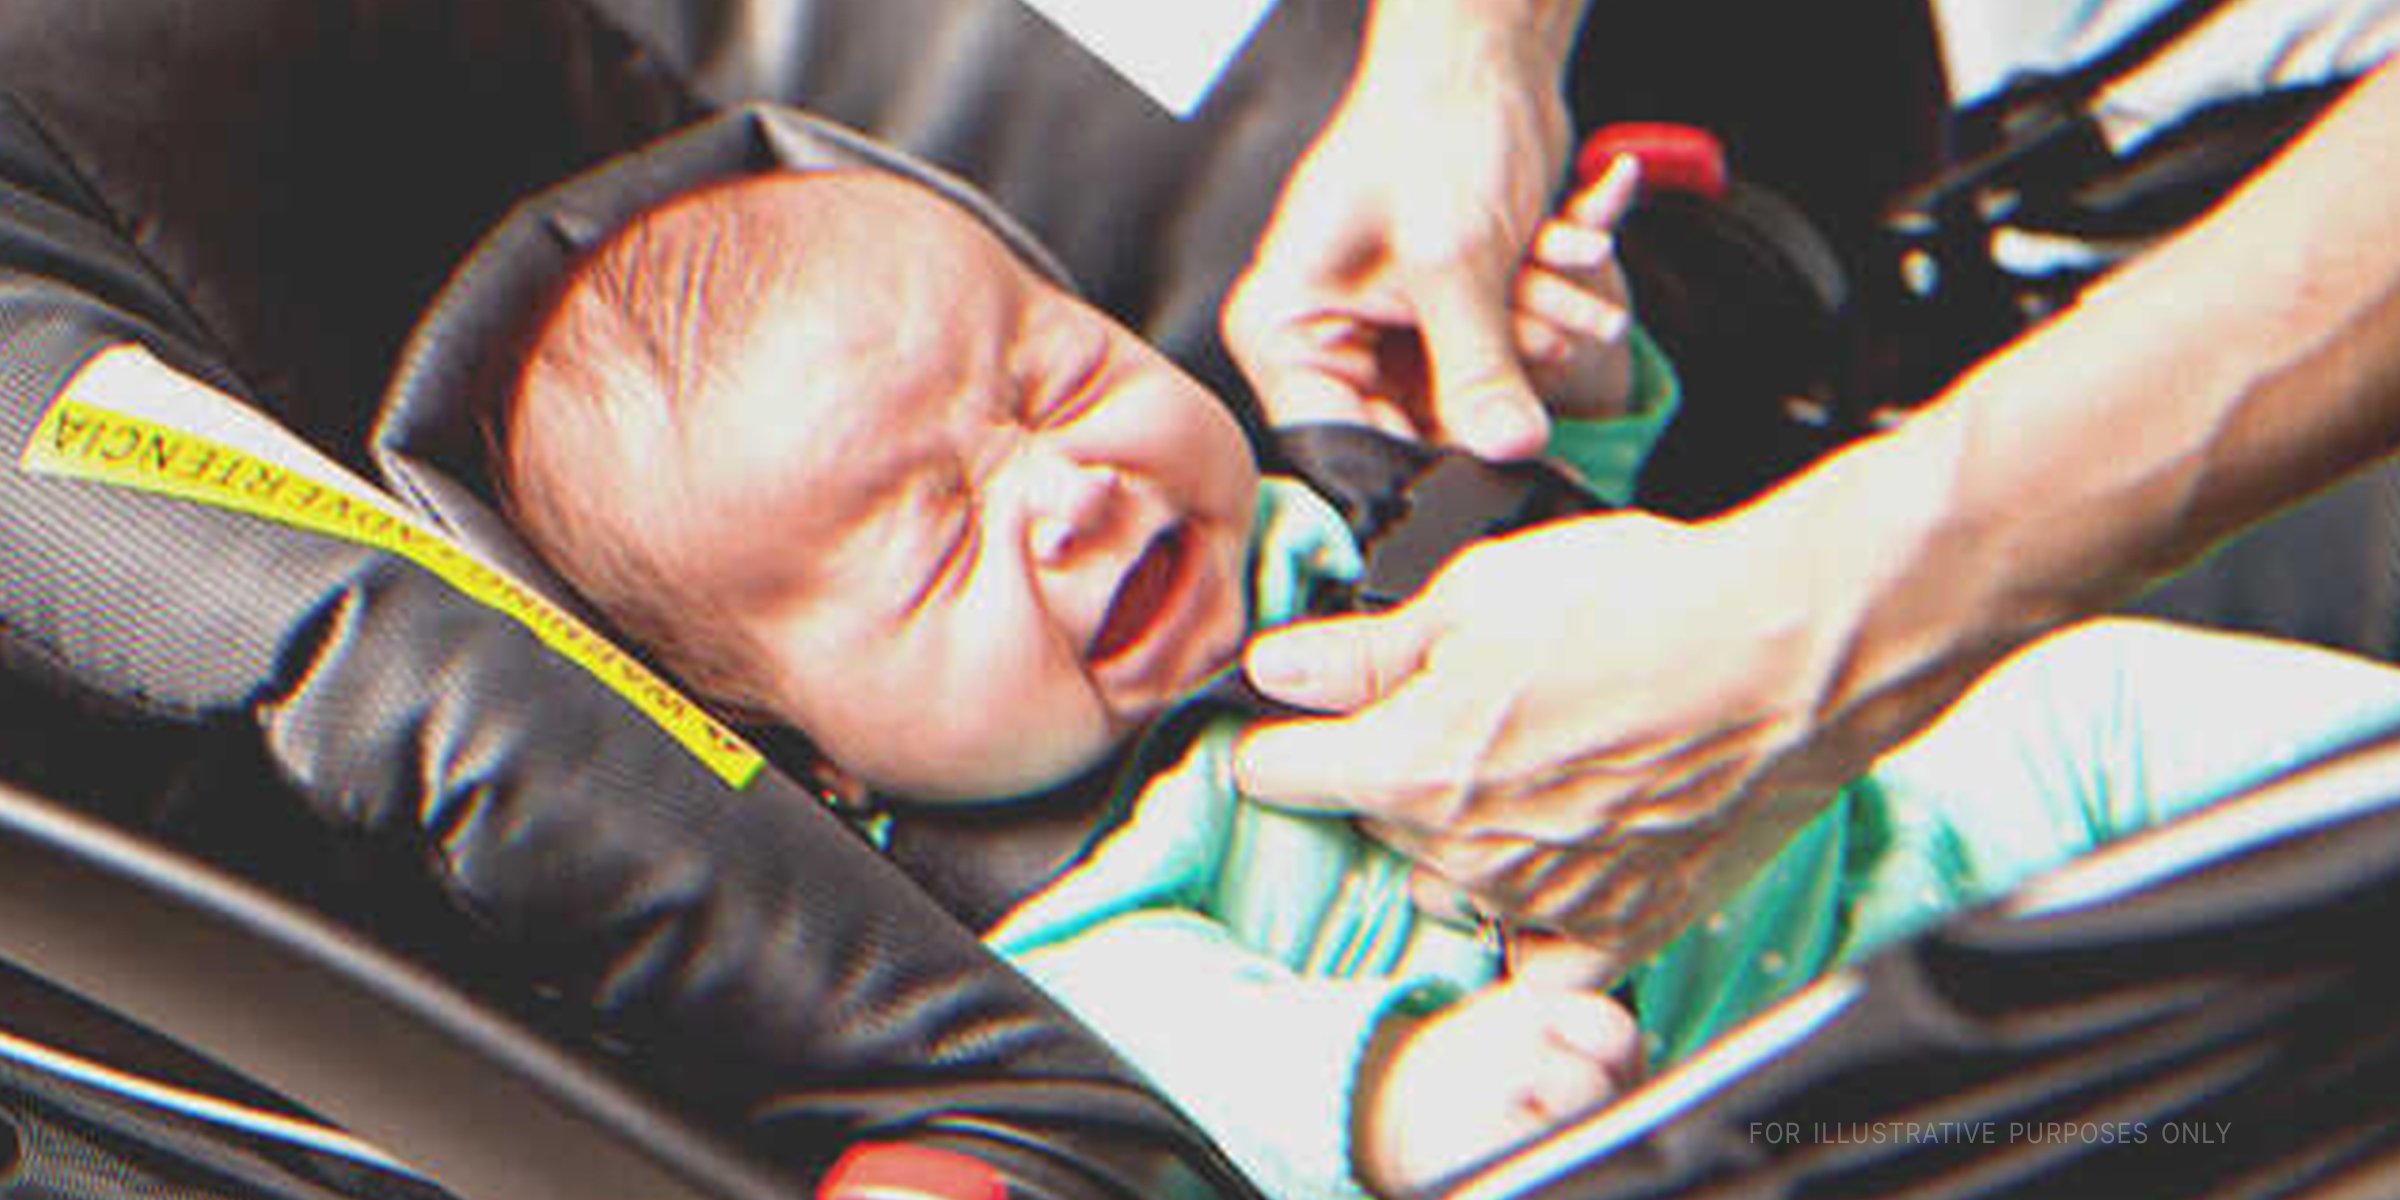 Crying Baby In Carrycot | Source: Shutterstock